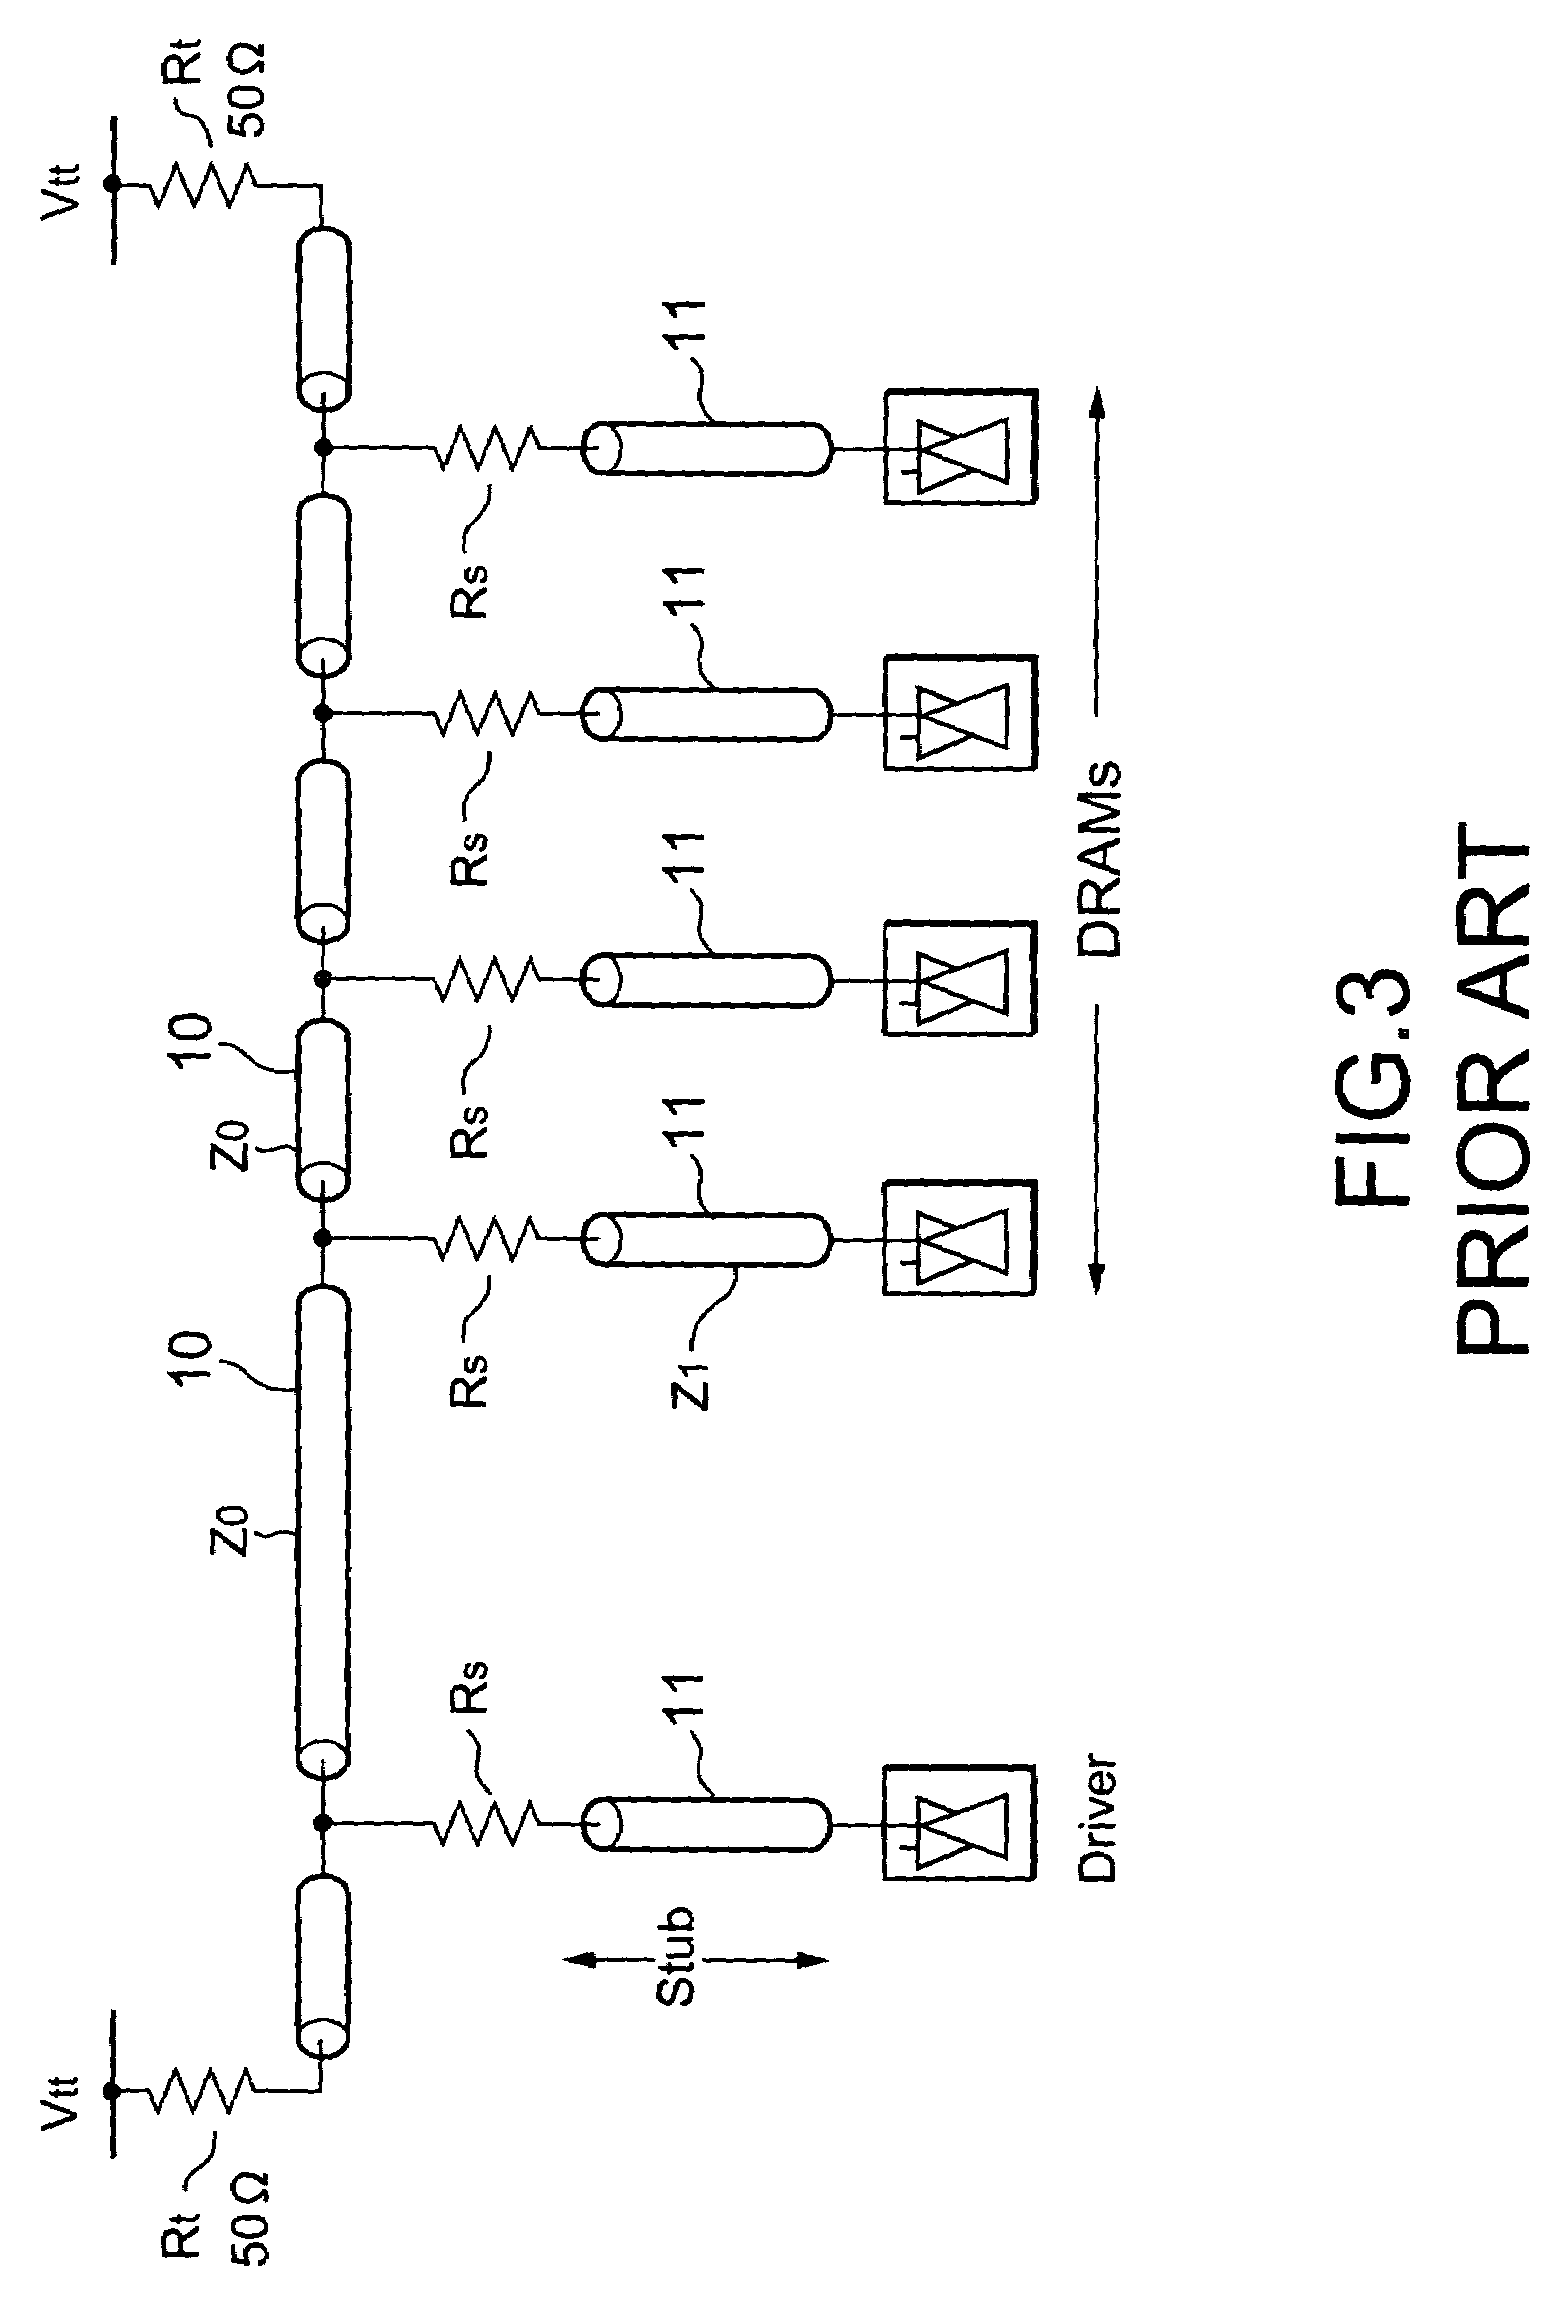 Semiconductor unit having two device terminals for every one input/output signal